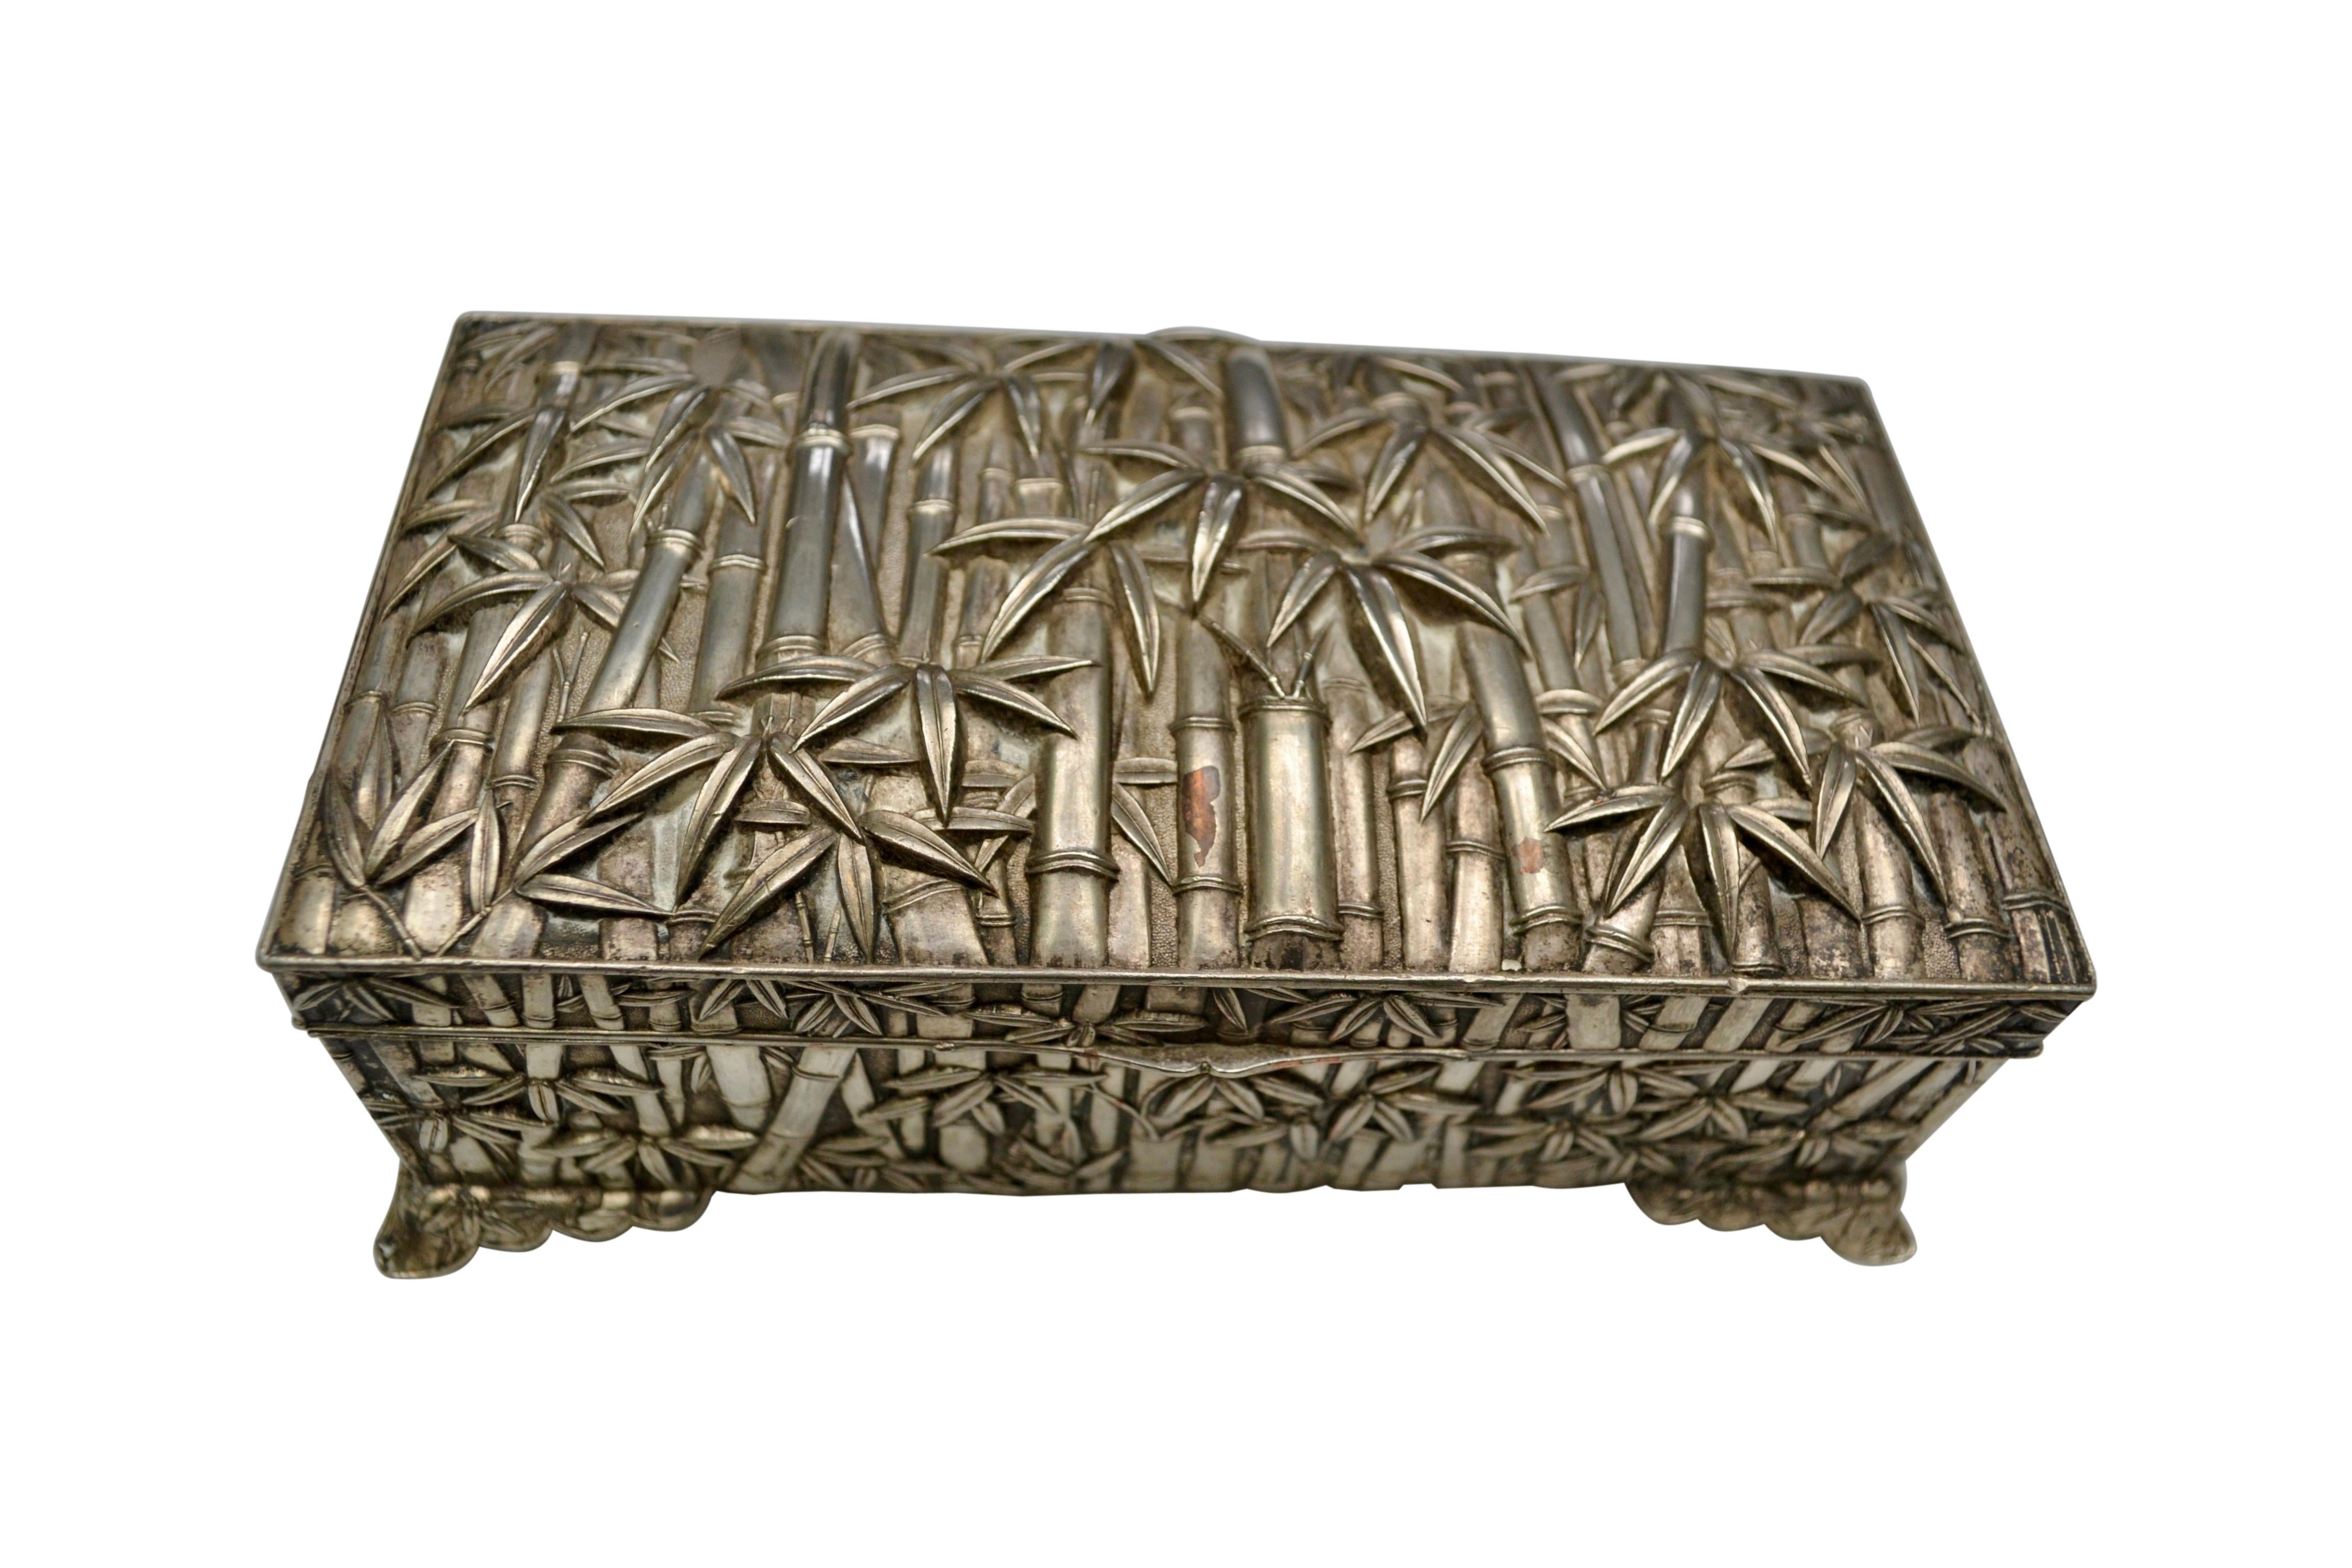 A silver plated wood lined =box with a hinged lid and stylized feet of profusely decorated with a forest of embossed bamboo trees tops. There i s a fan like hallmark on the bottom of he box.